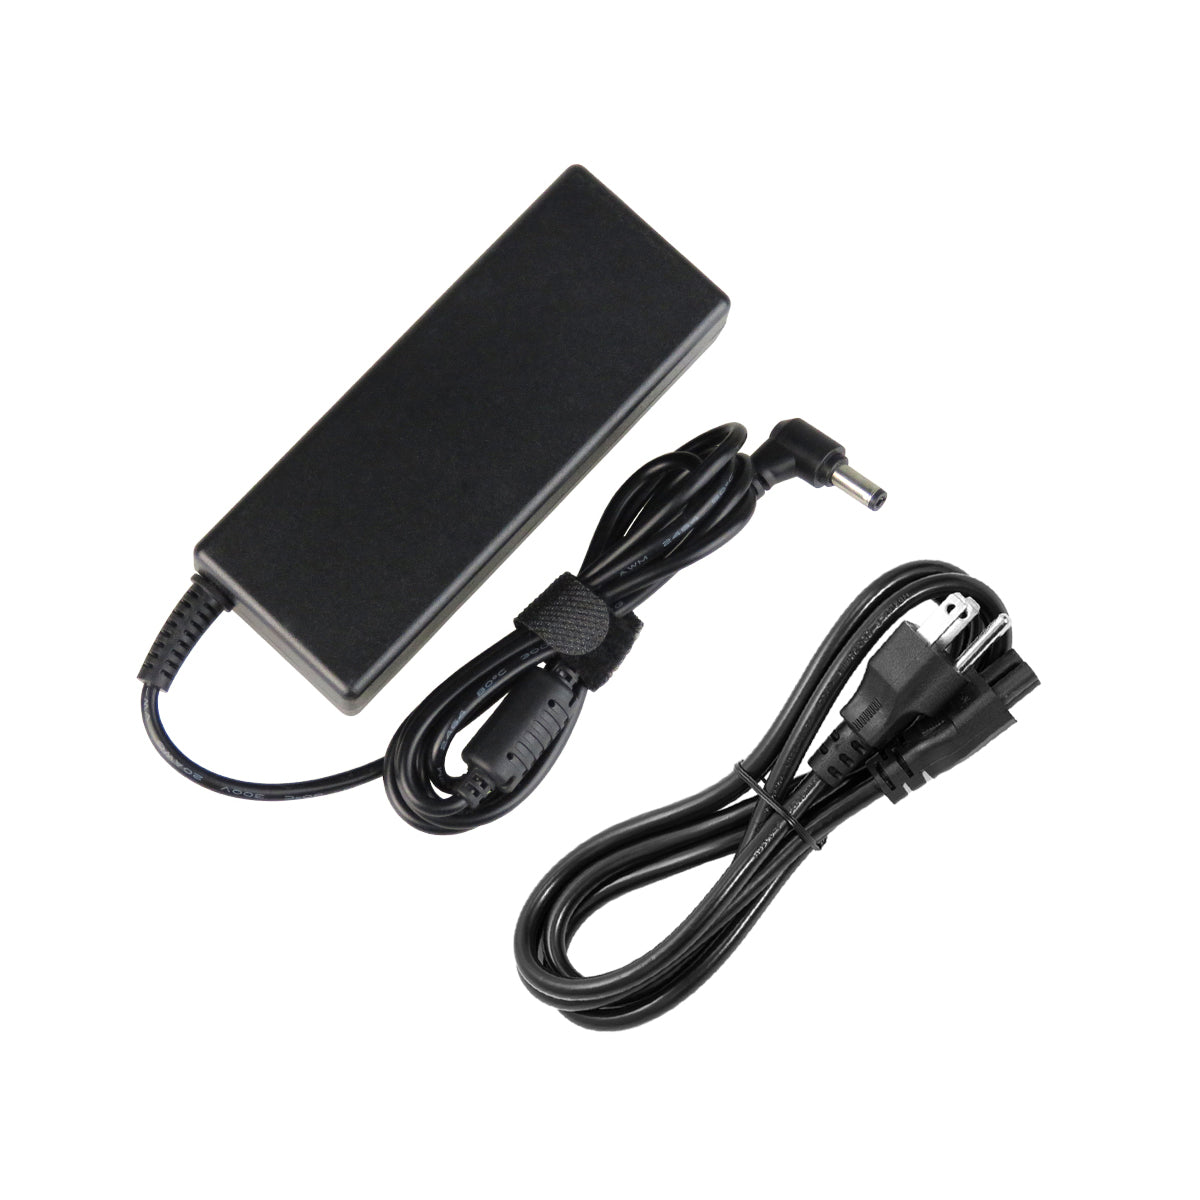 AC Adapter Charger for ASUS X54c Notebook.